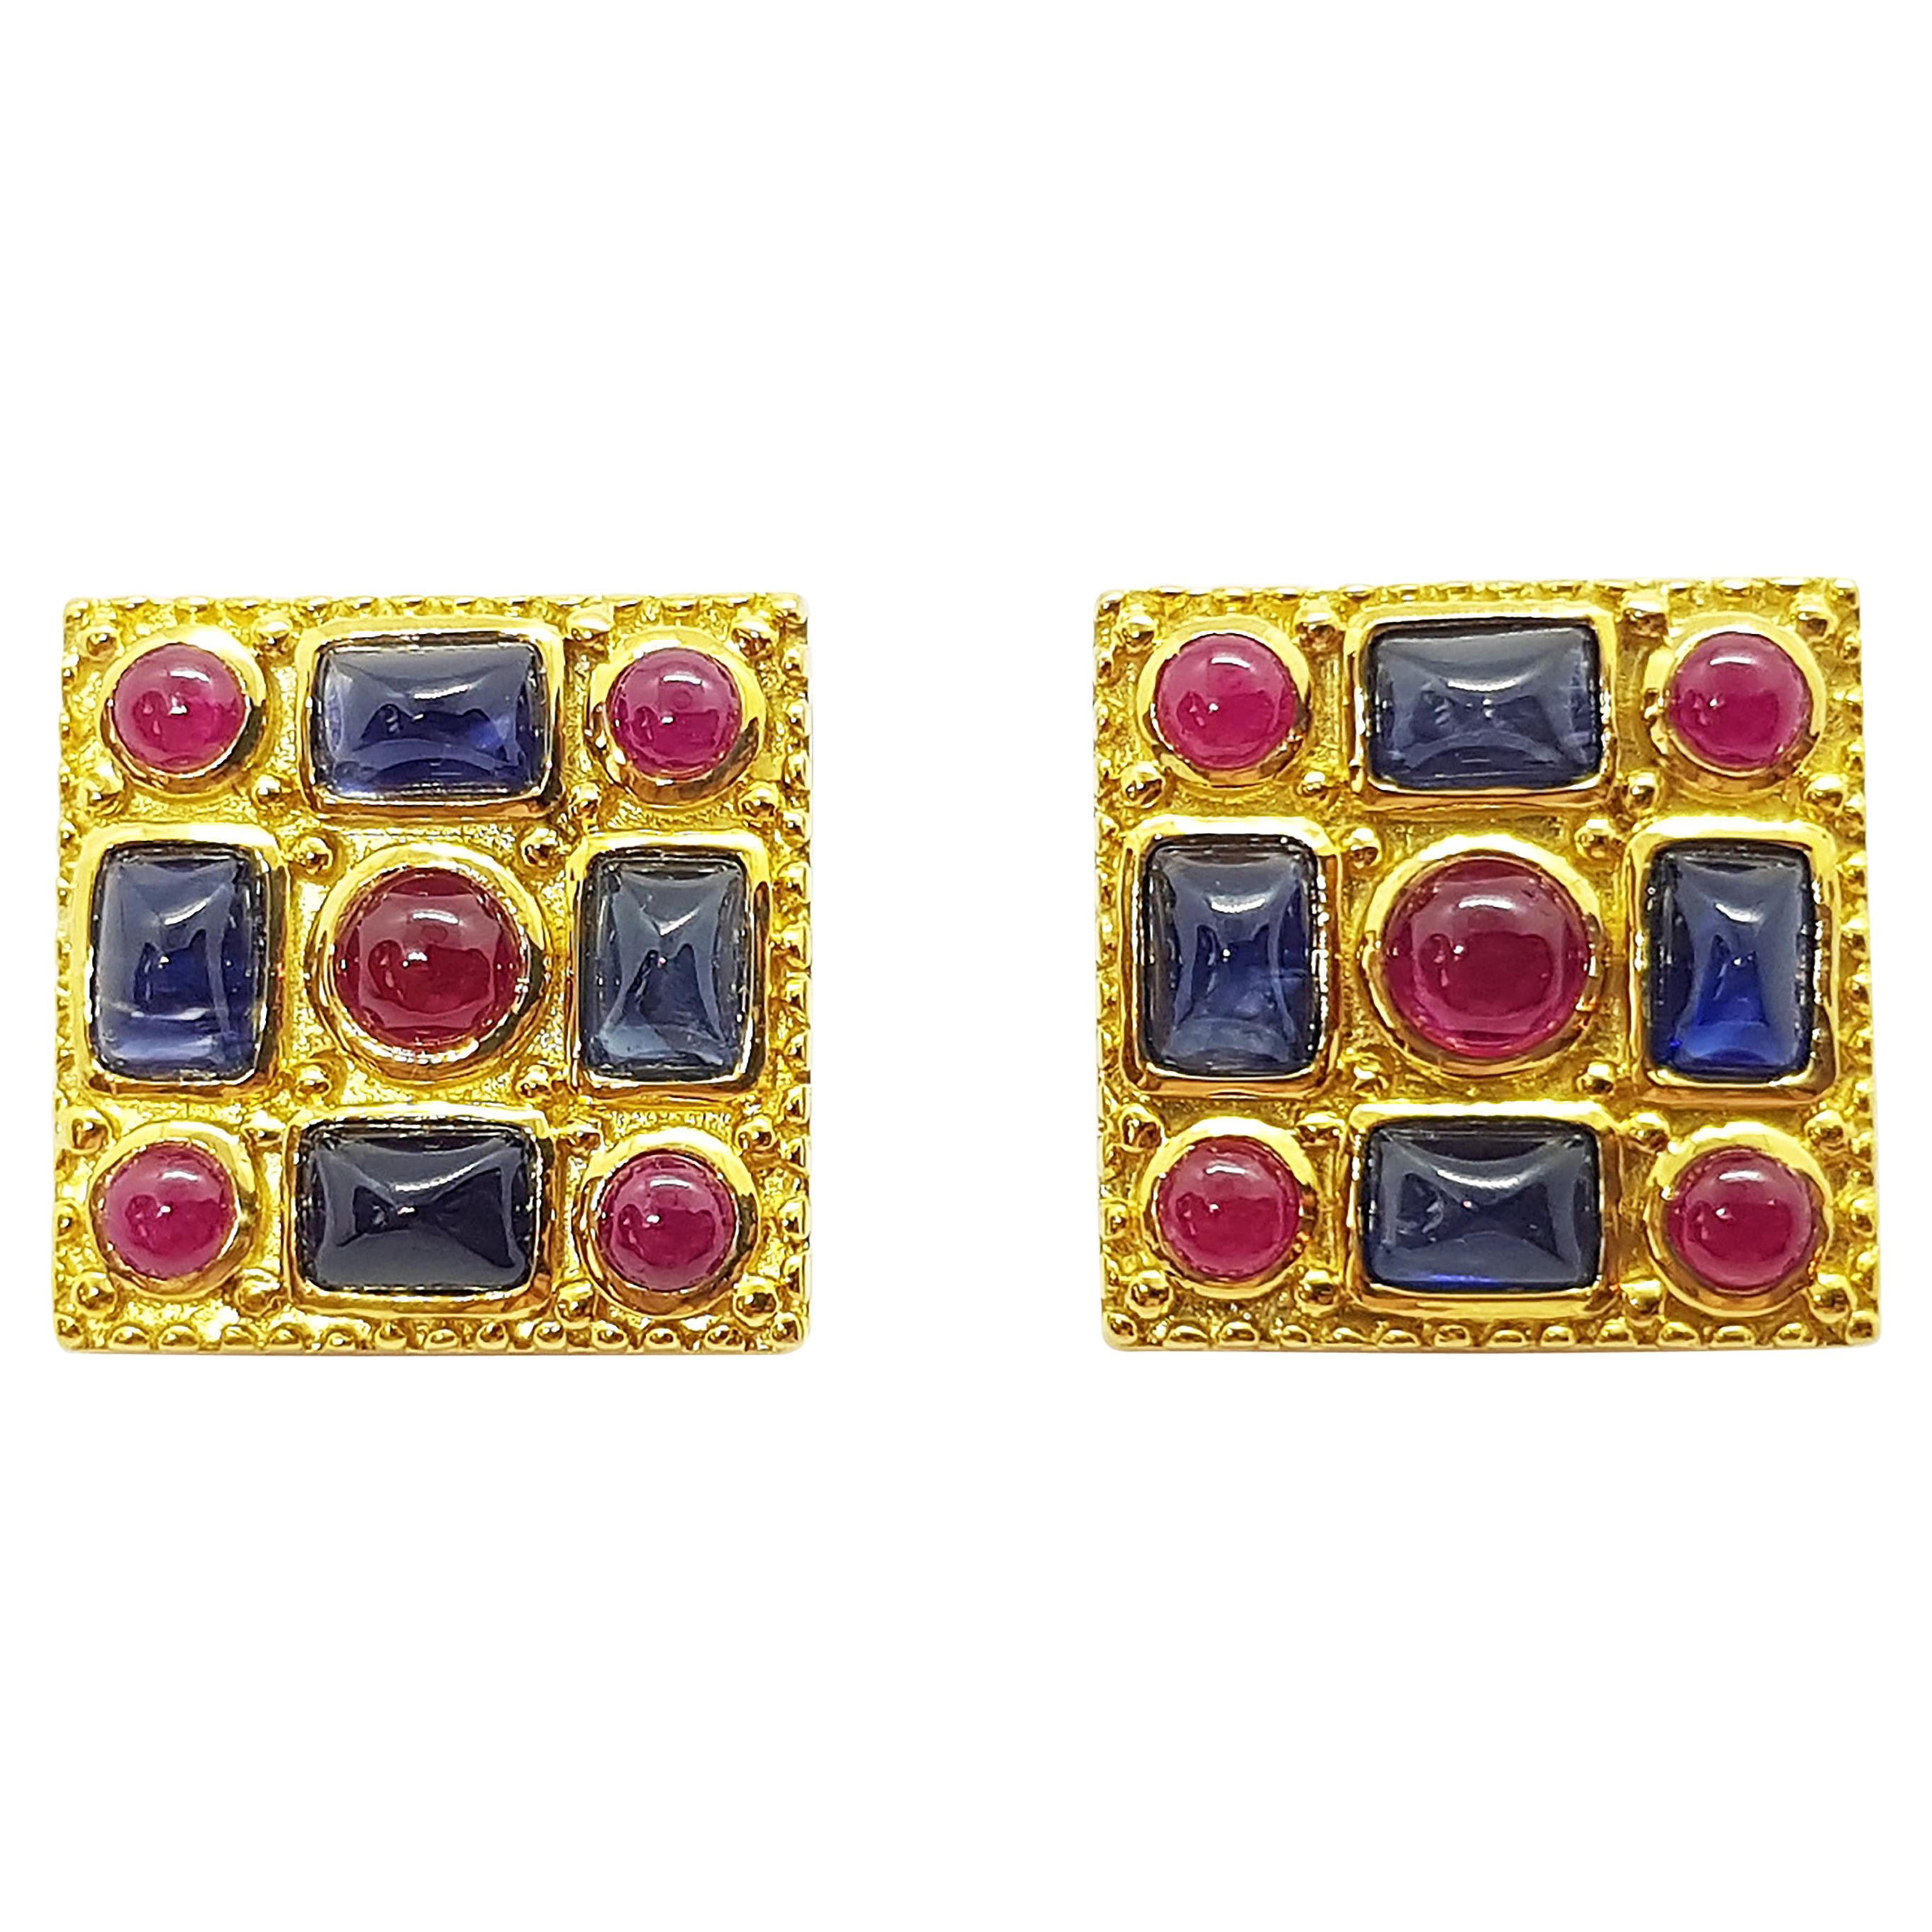 Cabochon Blue Sapphire with Cabochon Ruby Earrings Set in 18 Karat Gold Settings